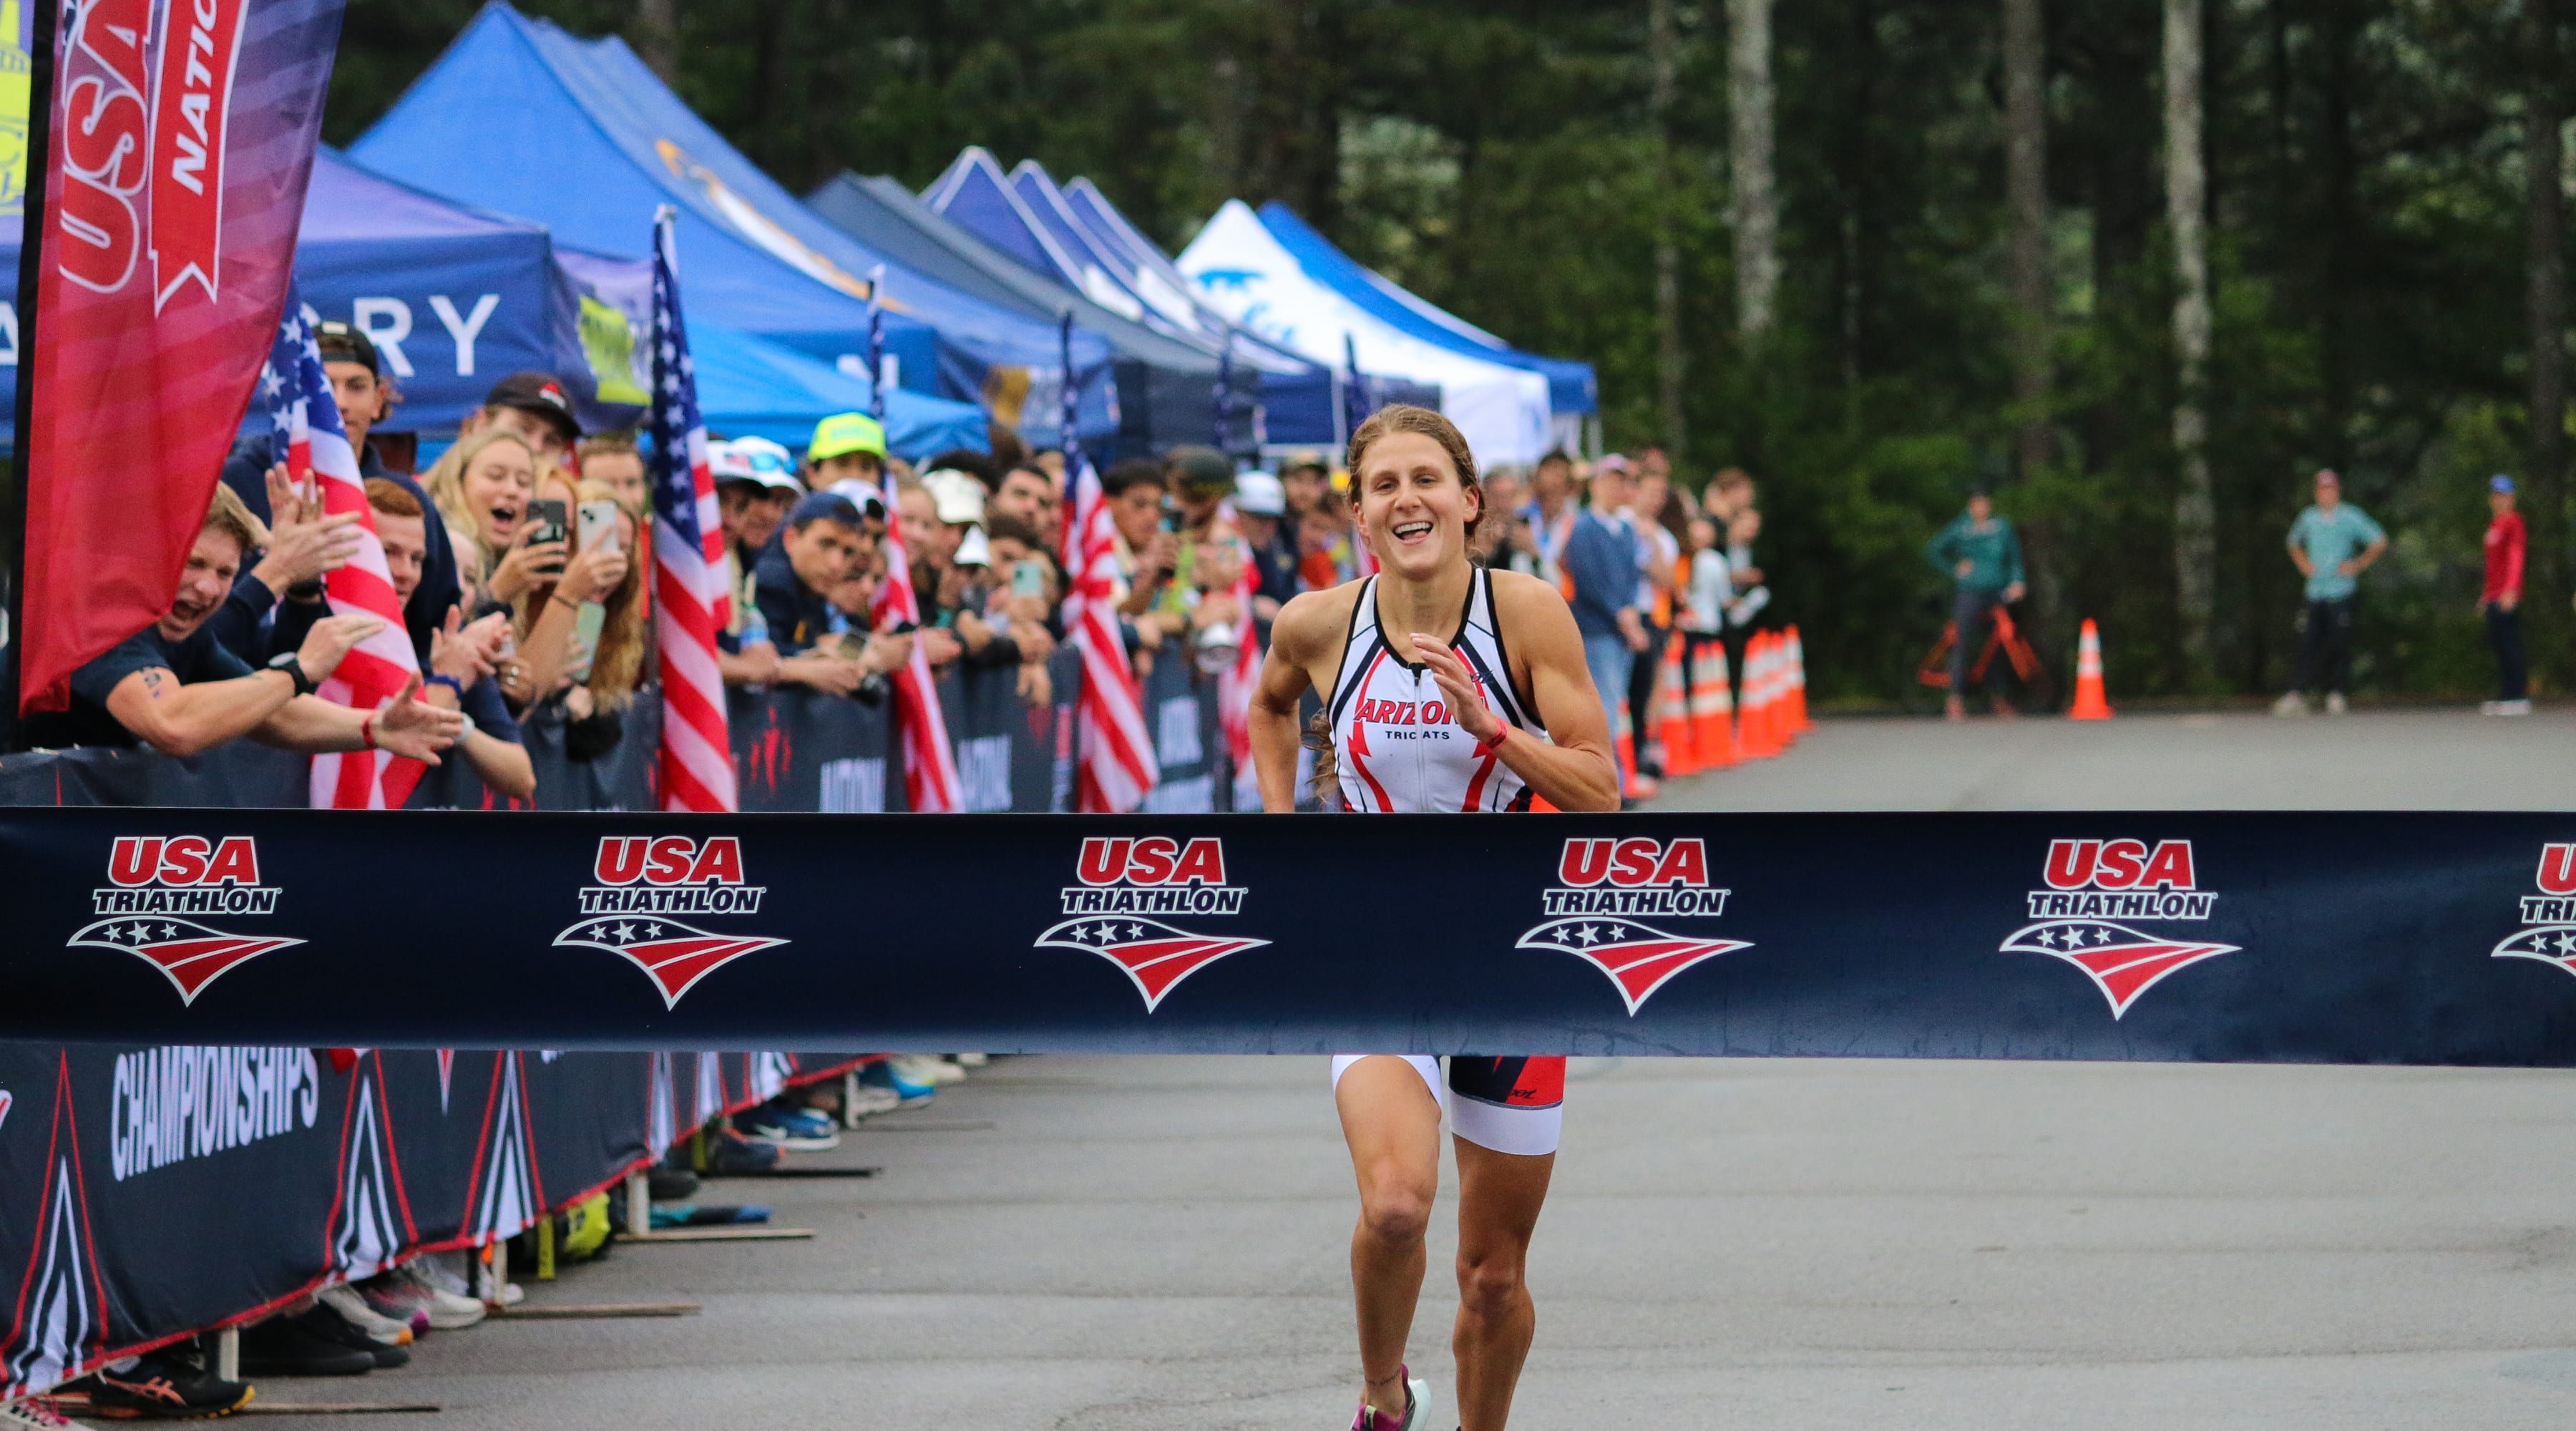 An athlete smiles as she approaches the finish line. The winner's tape is stretched across the finish line.